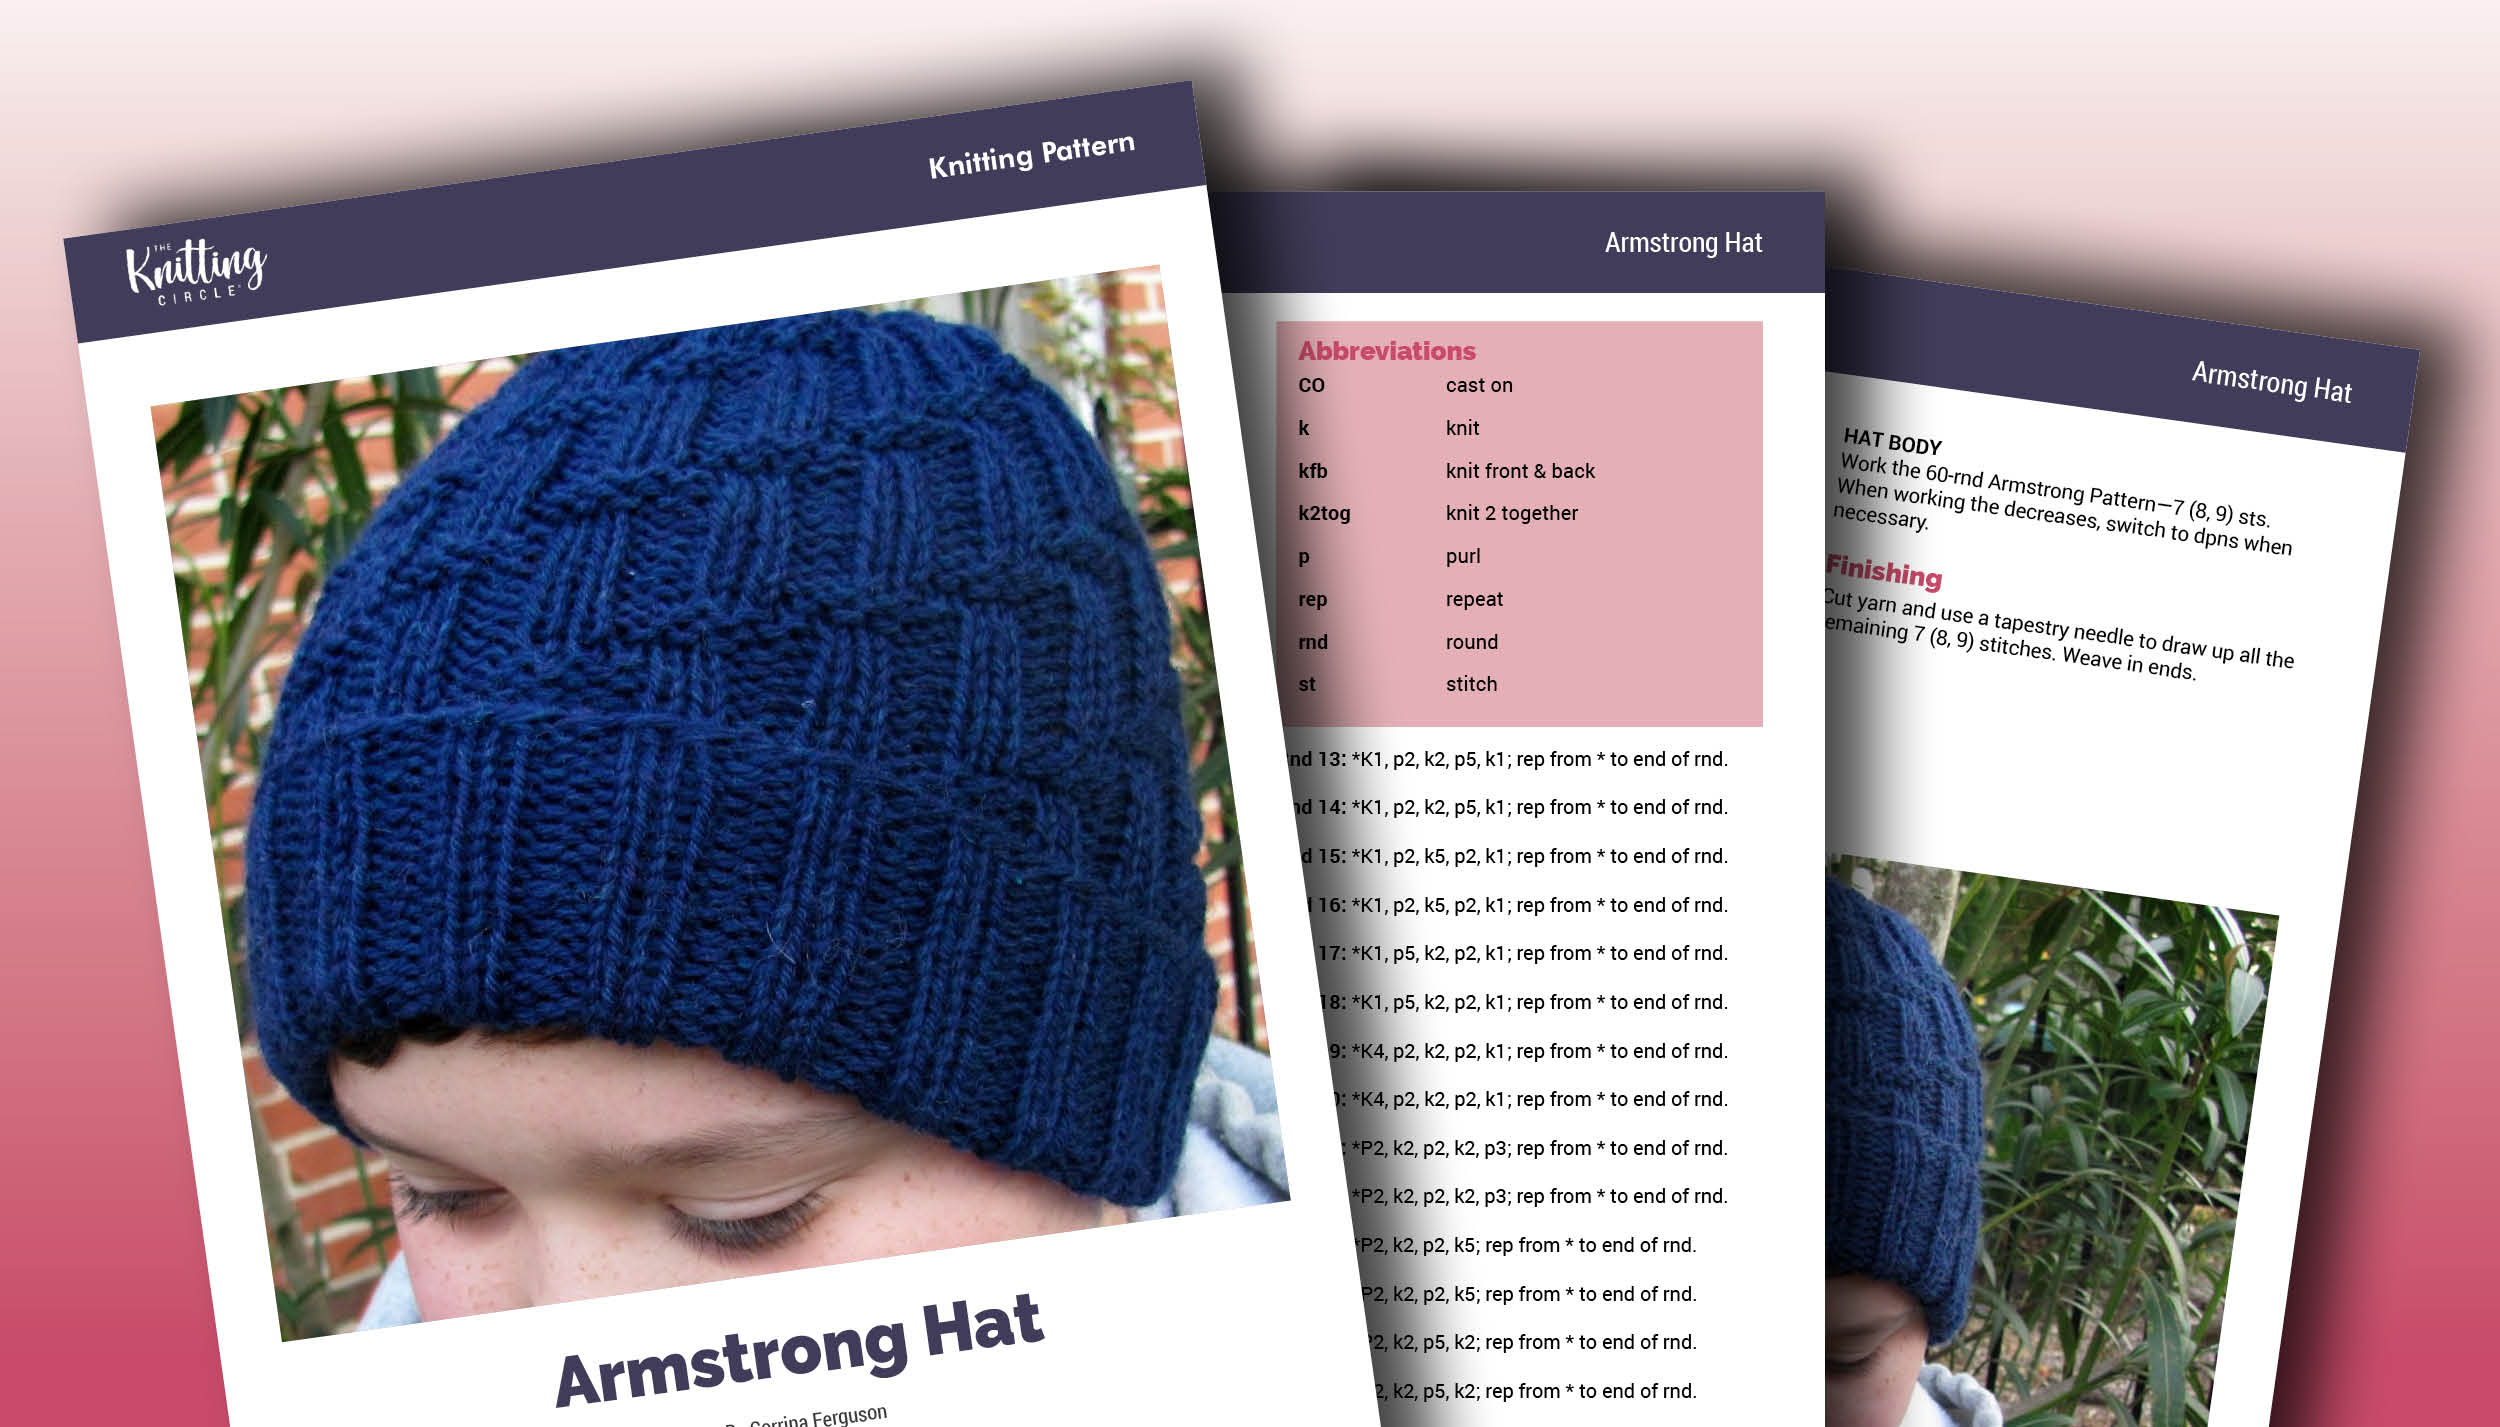 Knit Armstrong Hat pattern